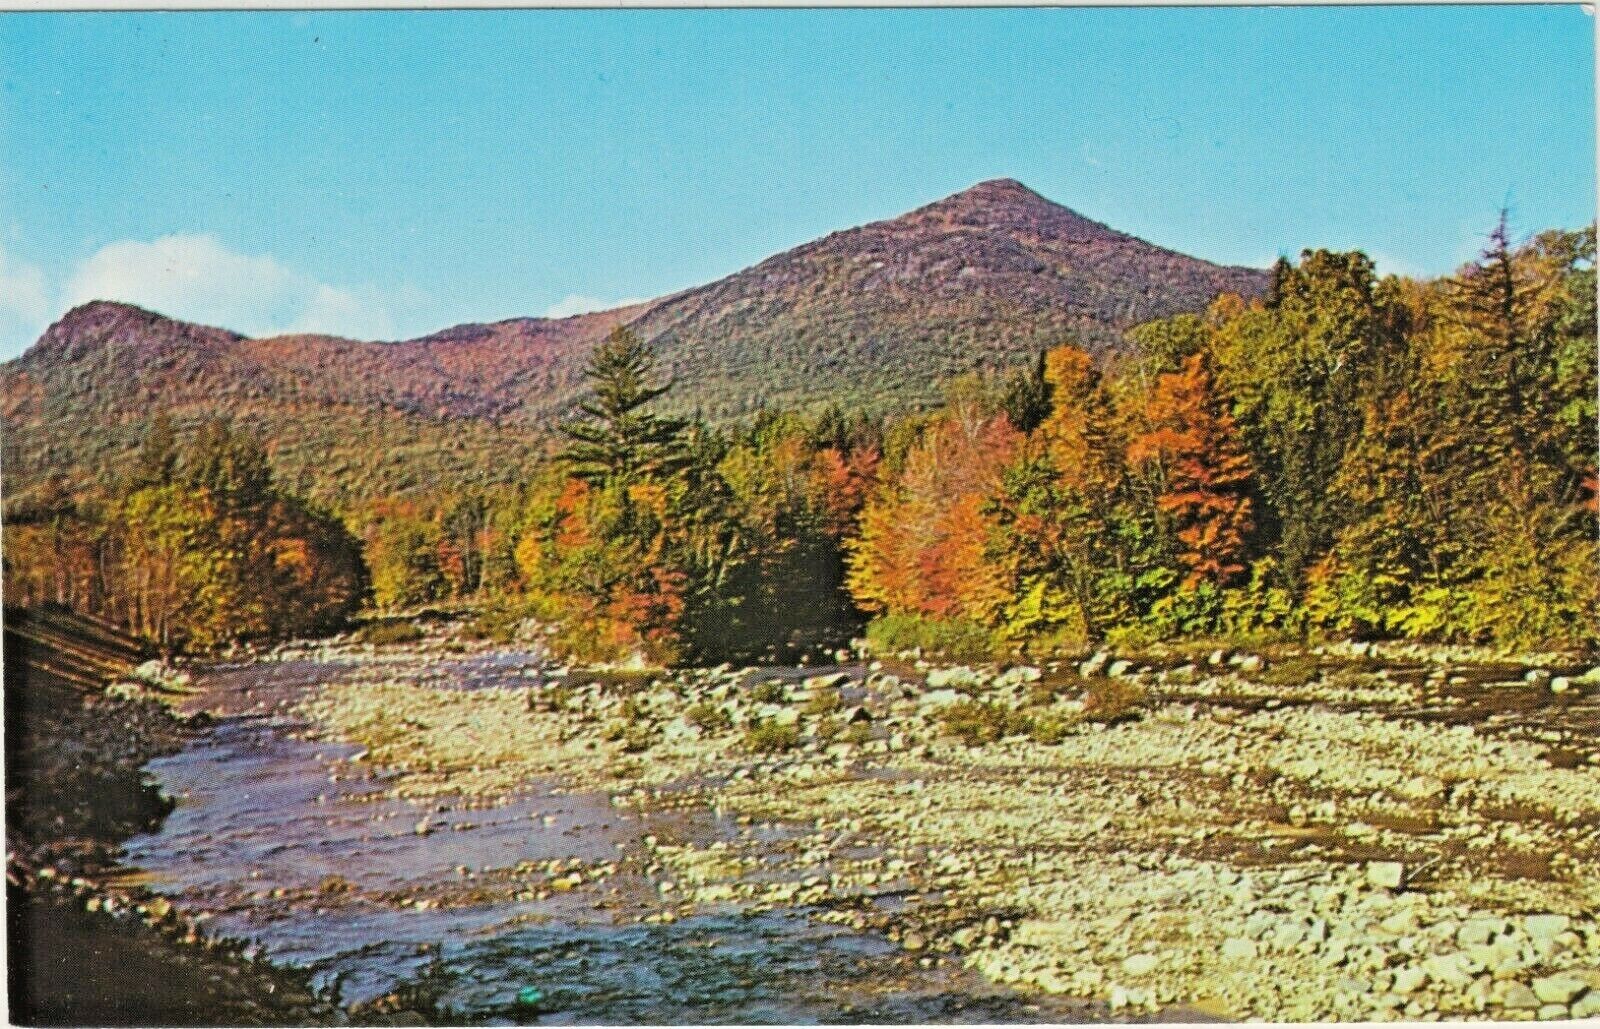 A Typical New England Fall Scene along a Stream with Trees with Colorful Leaves